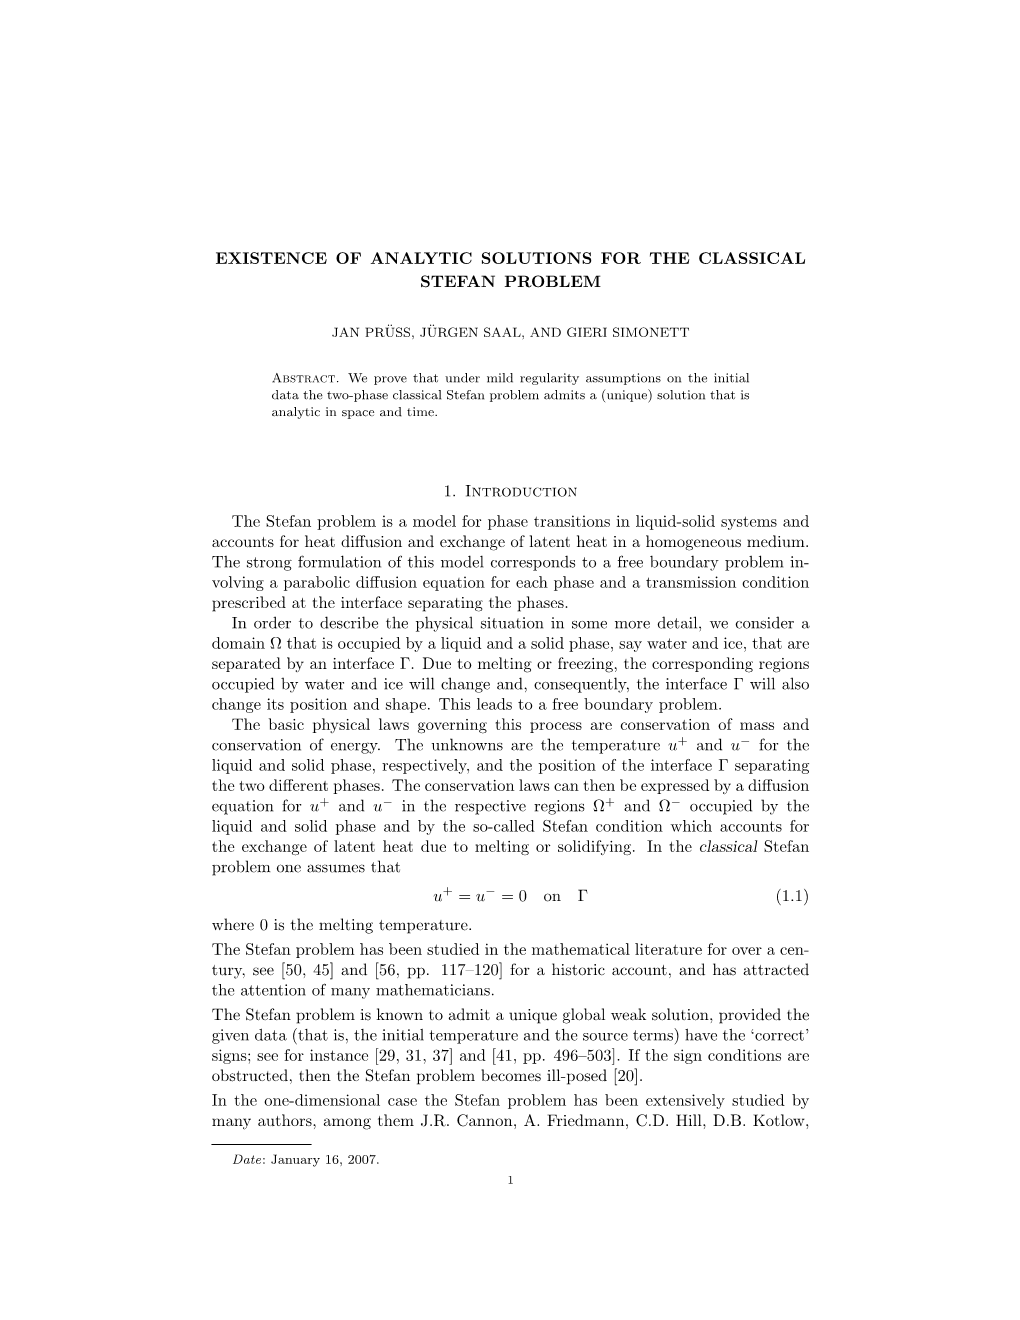 Existence of Analytic Solutions for the Classical Stefan Problem